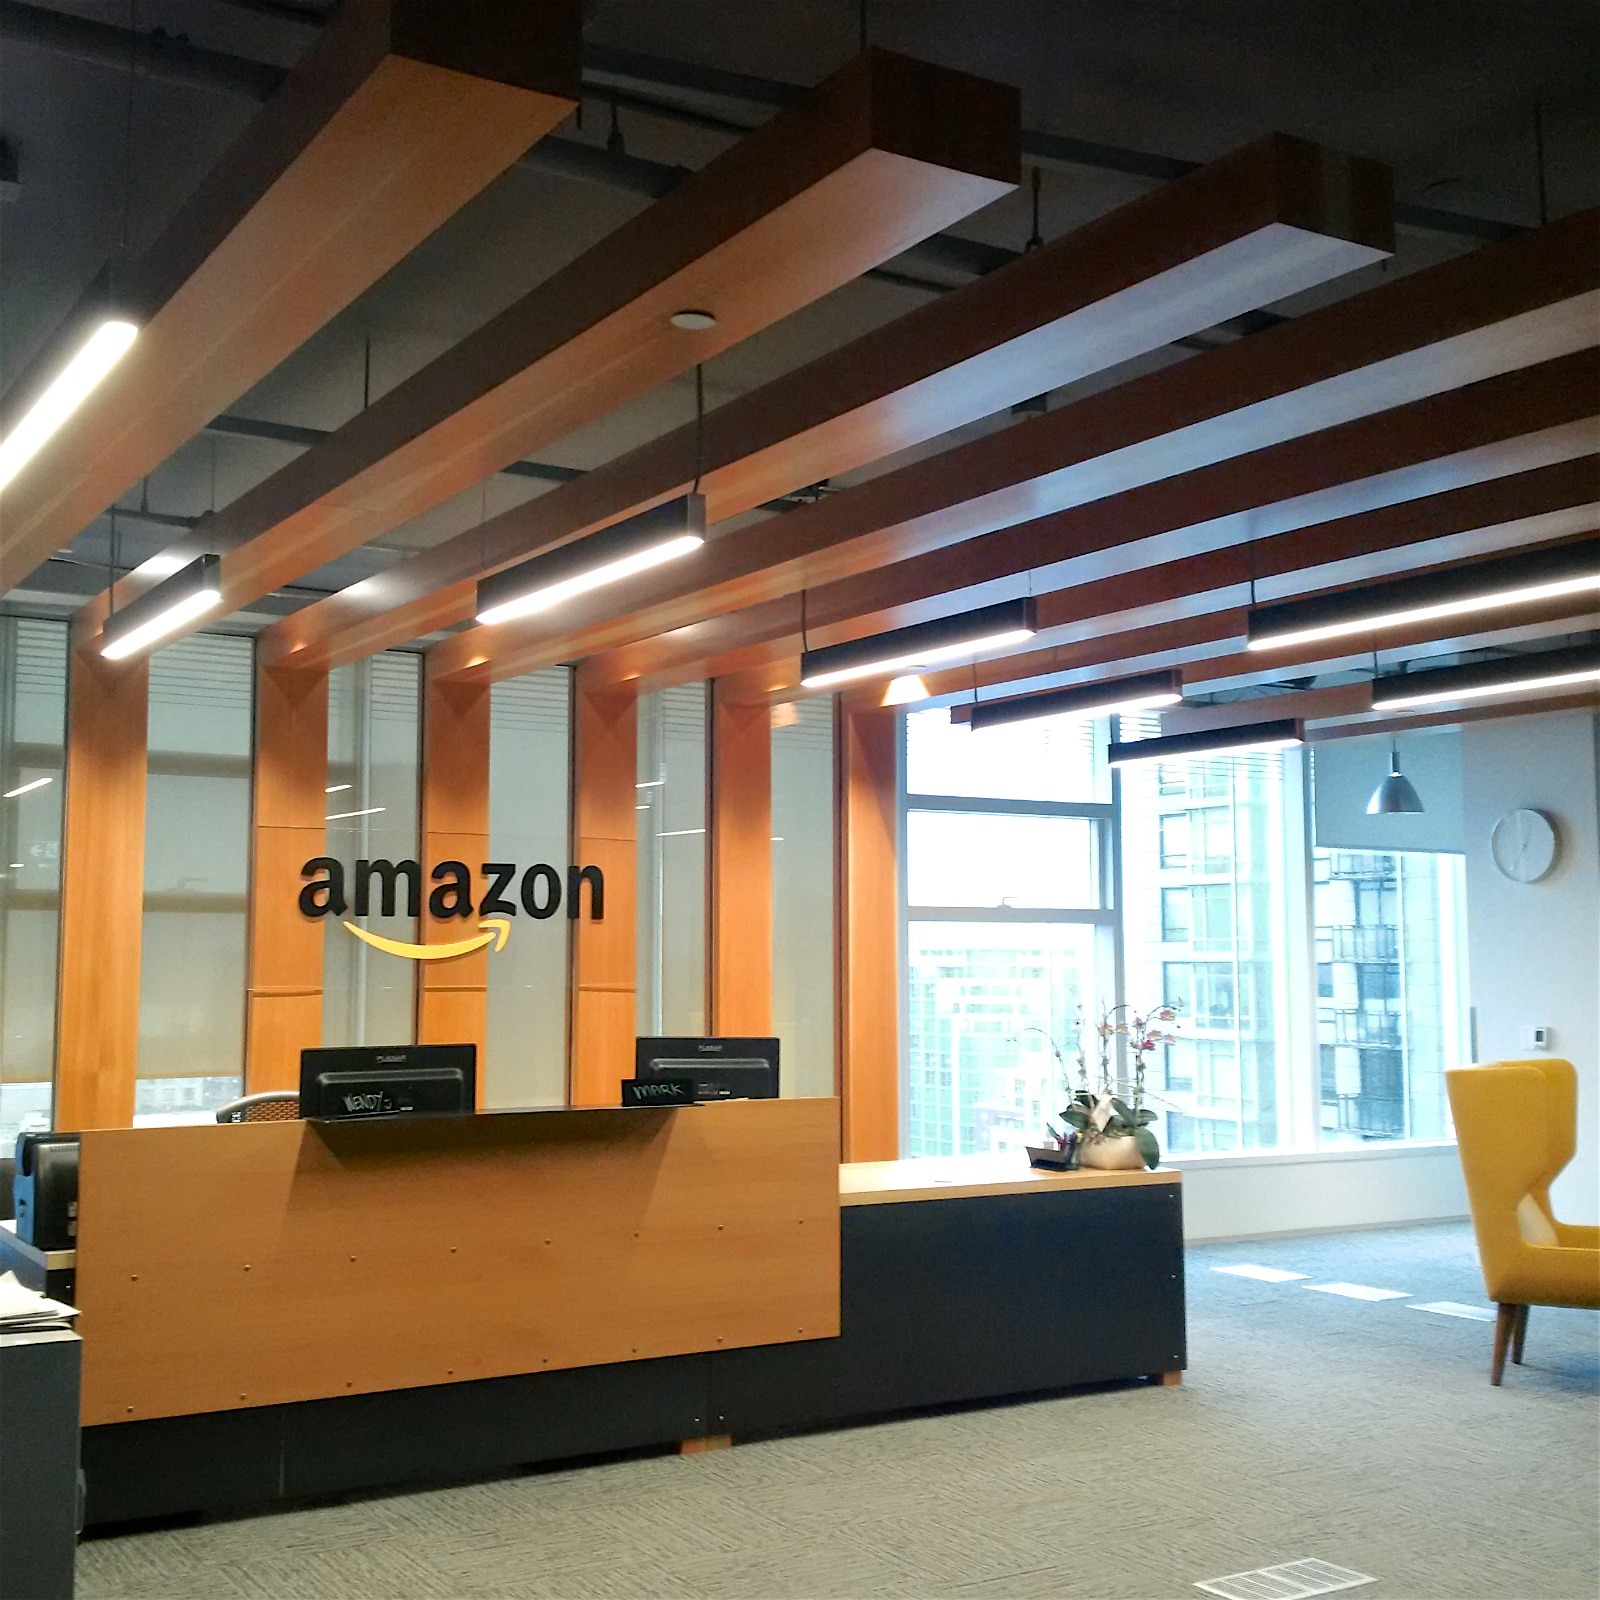 Robertson-Walls-Ceilings-Completed-Projects-Office-Interiors-Amazon-Vancouver-5 AMAZON, VANCOUVER